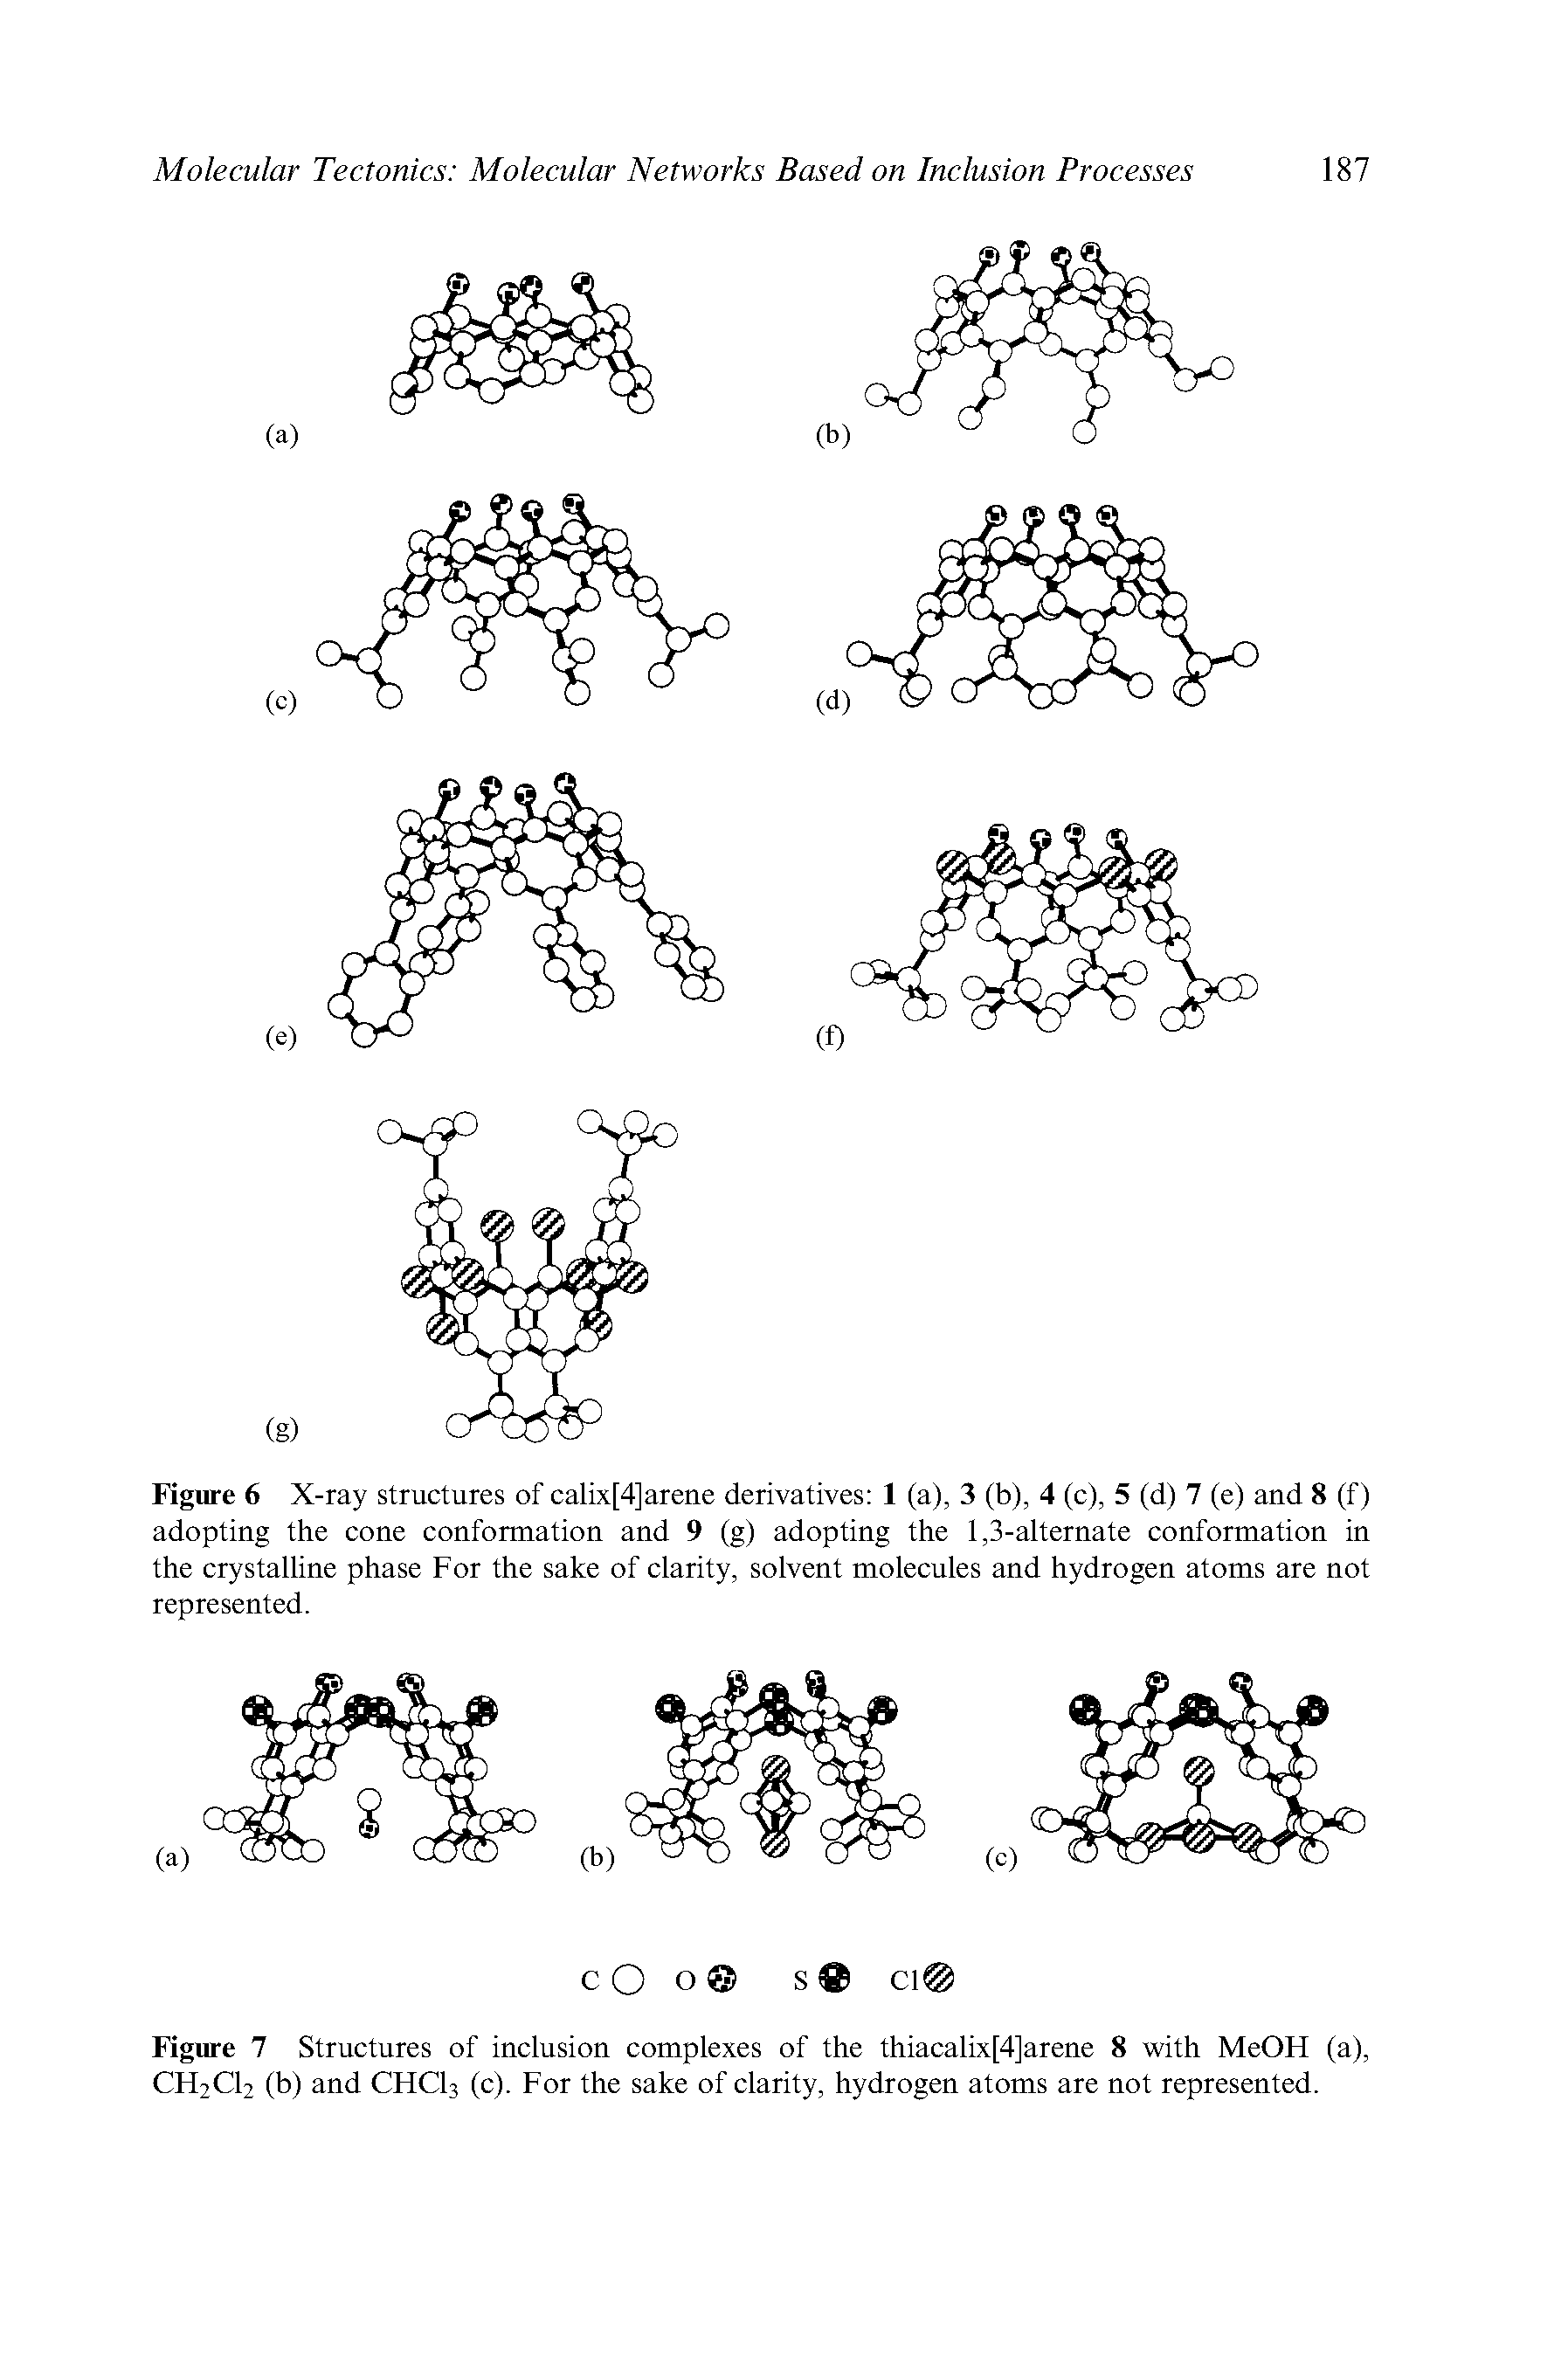 Figure 6 X-ray structures of calix[4]arene derivatives 1 (a), 3 (b), 4 (c), 5 (d) 7 (e) and 8 (f) adopting the cone conformation and 9 (g) adopting the 1,3-alternate conformation in the crystalline phase For the sake of clarity, solvent molecules and hydrogen atoms are not represented.